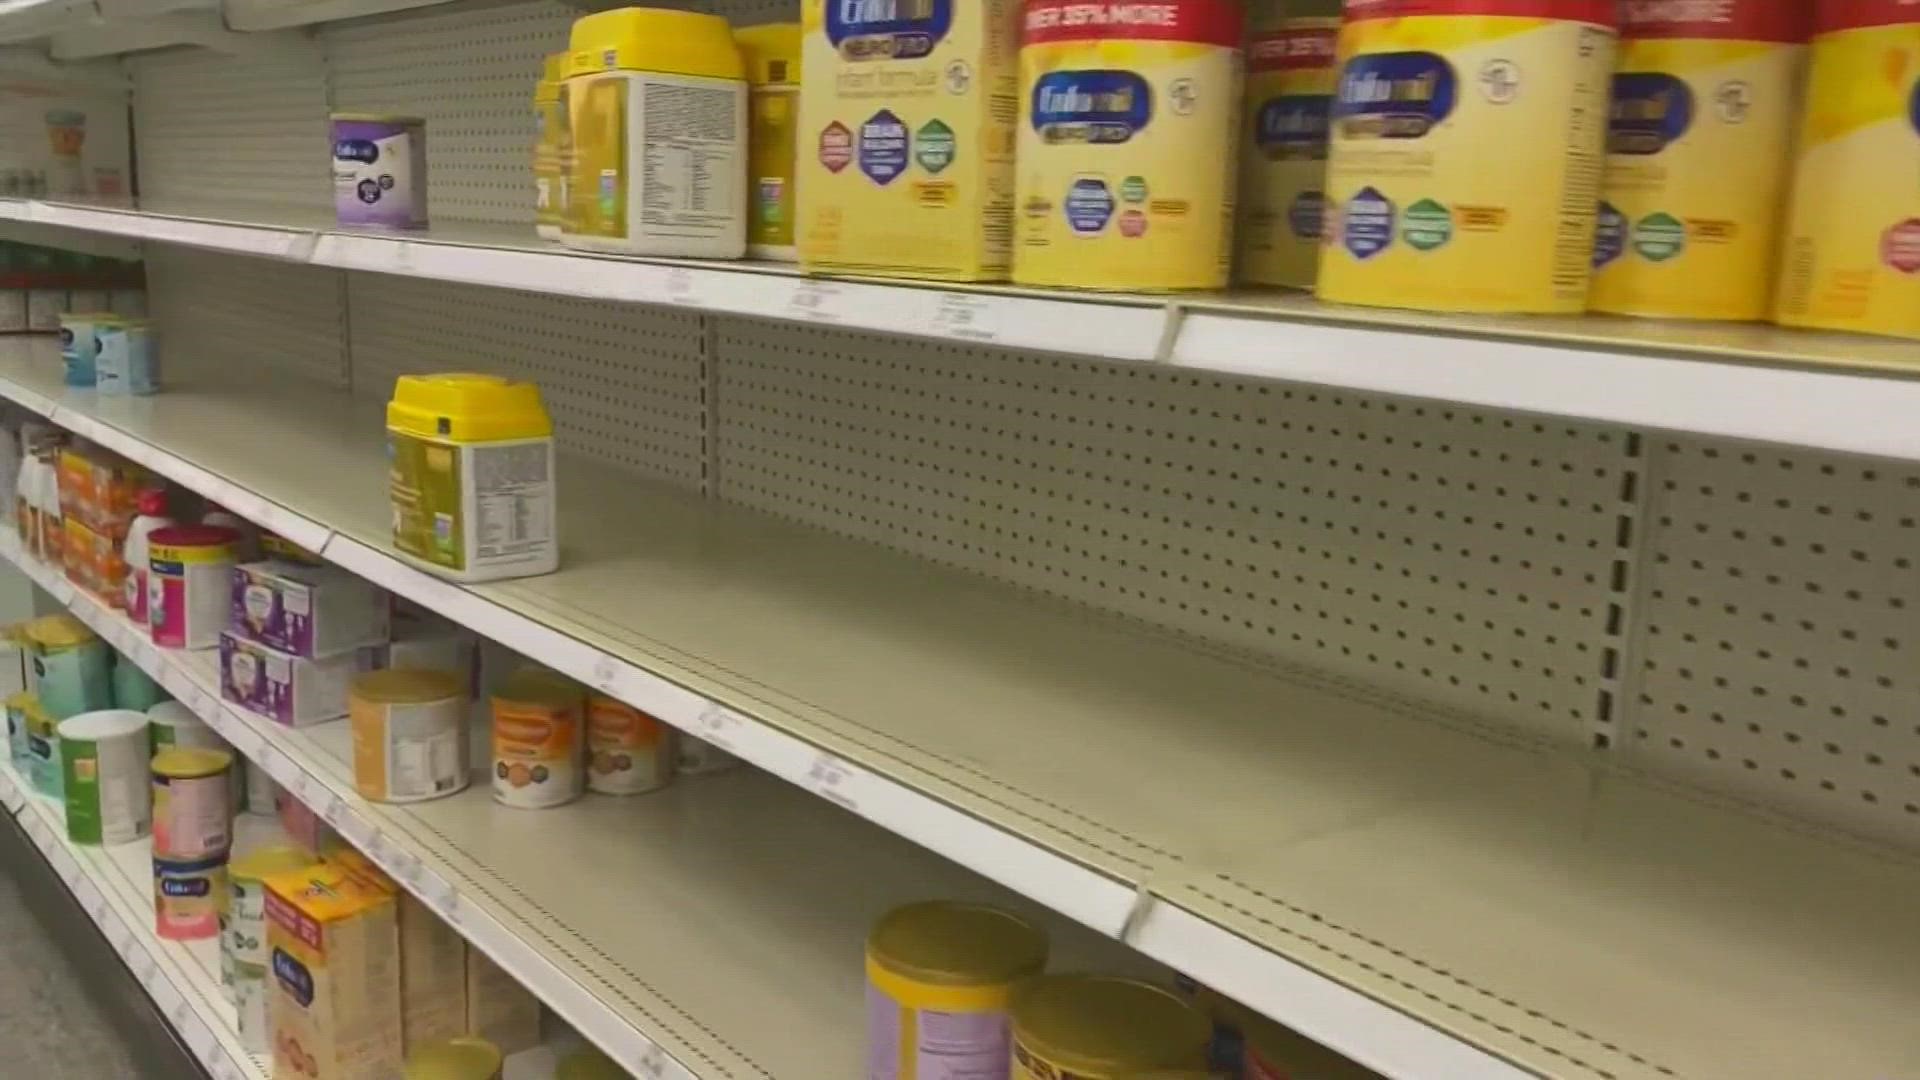 Amid a national shortage for baby formula, local families are struggling to find alternatives.